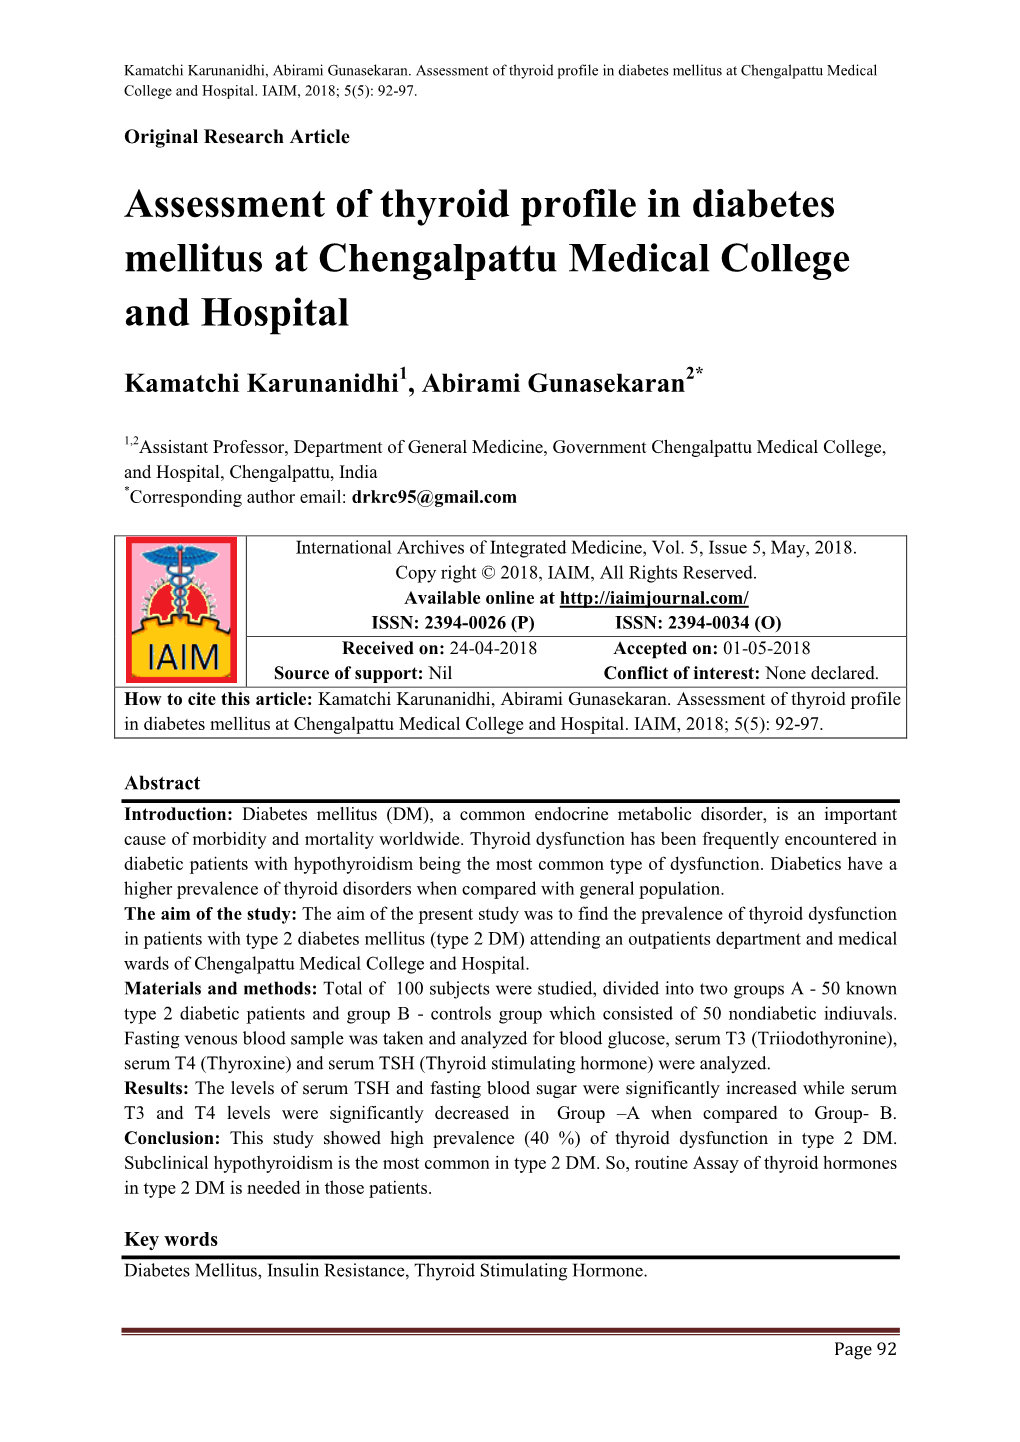 Assessment of Thyroid Profile in Diabetes Mellitus at Chengalpattu Medical College and Hospital